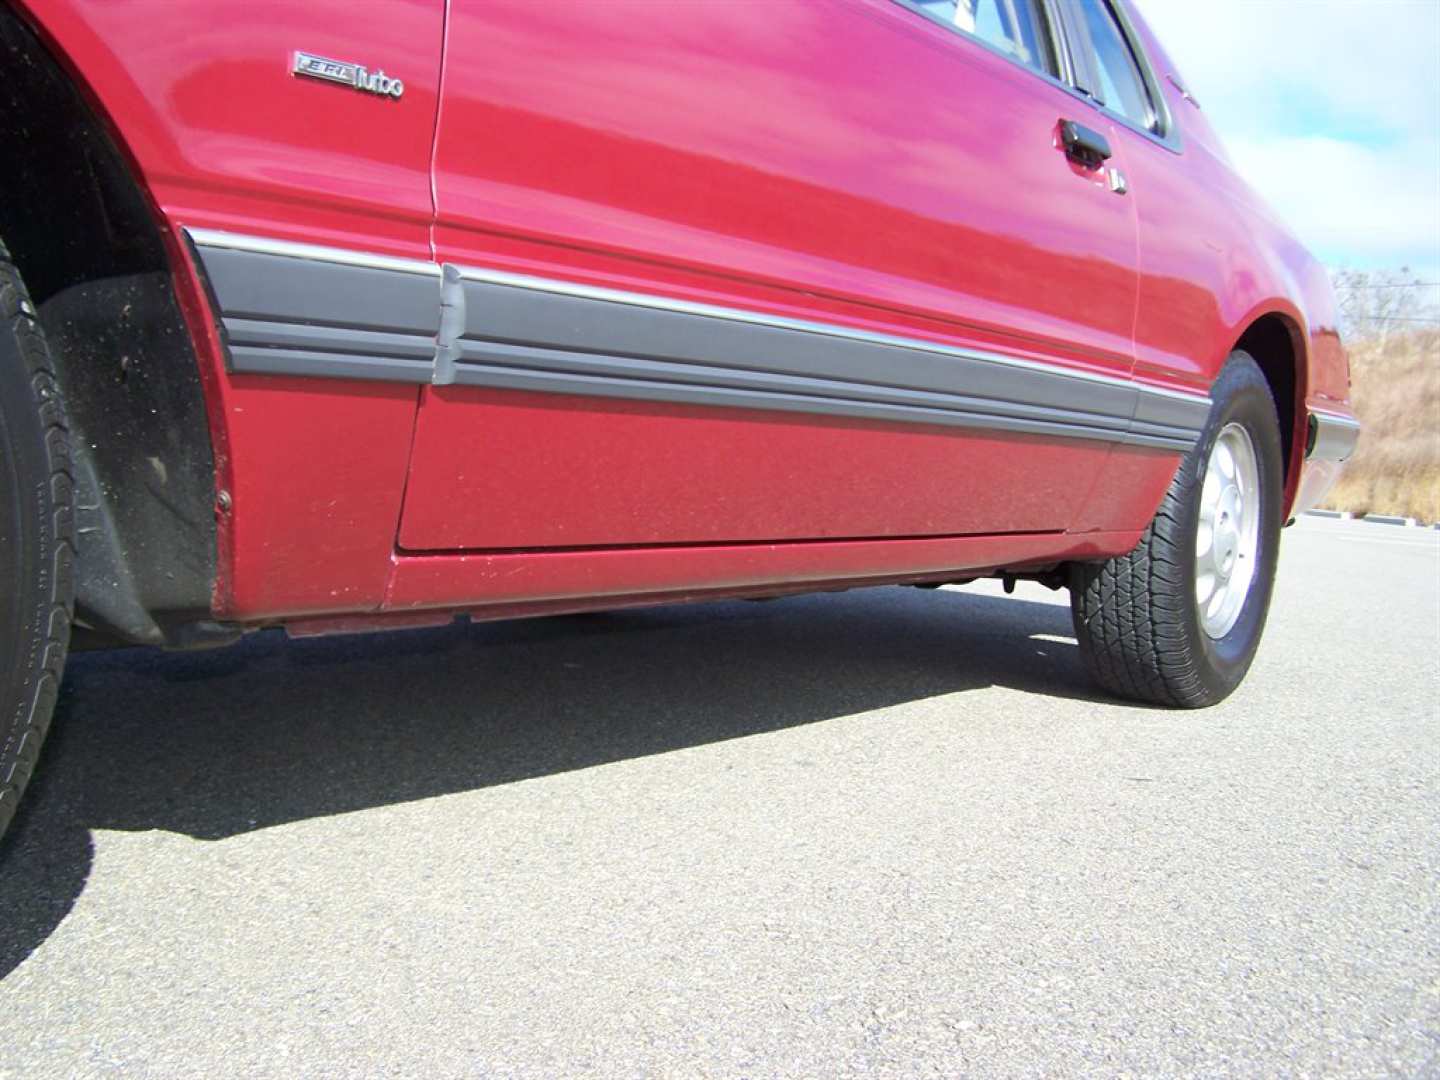 7th Image of a 1984 FORD THUNDERBIRD